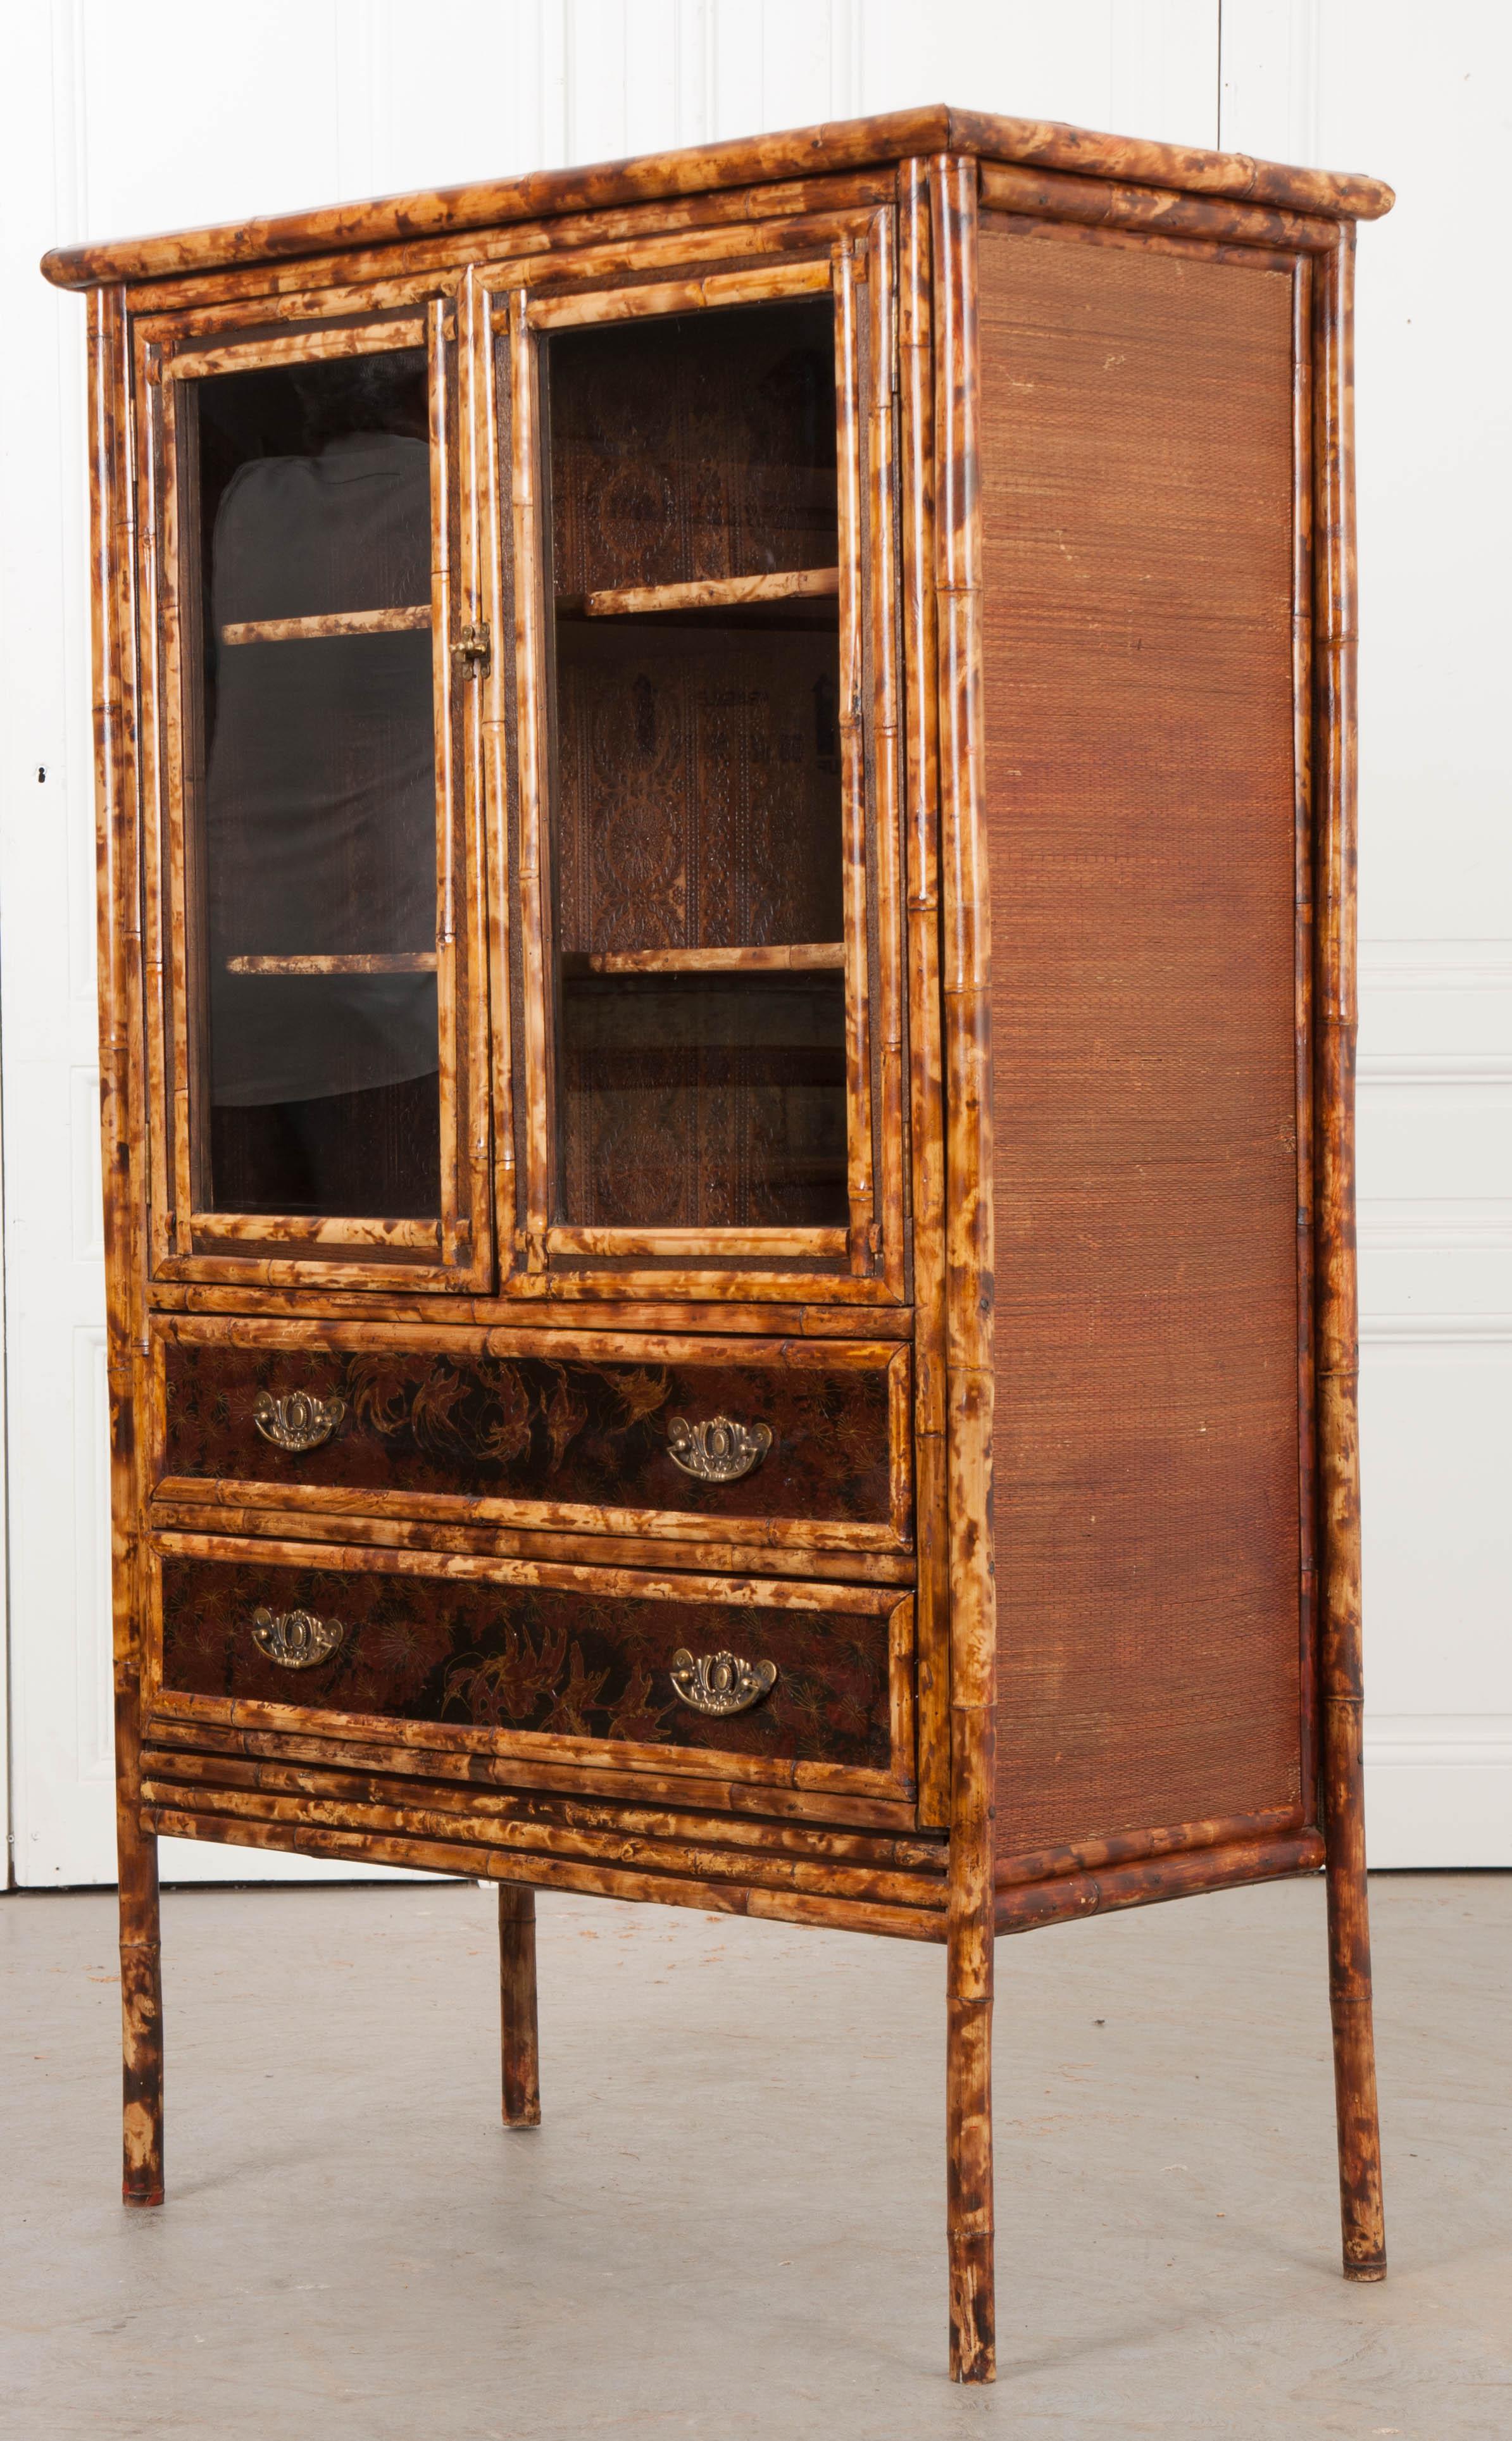 This fabulous example of an Aesthetic Movement faux-tortoise bamboo bookcase, c.1880, is from England. Petite in stature and retaining all of the original components, this piece features a pair of glazed door that reveal a pair of shelves, entirely